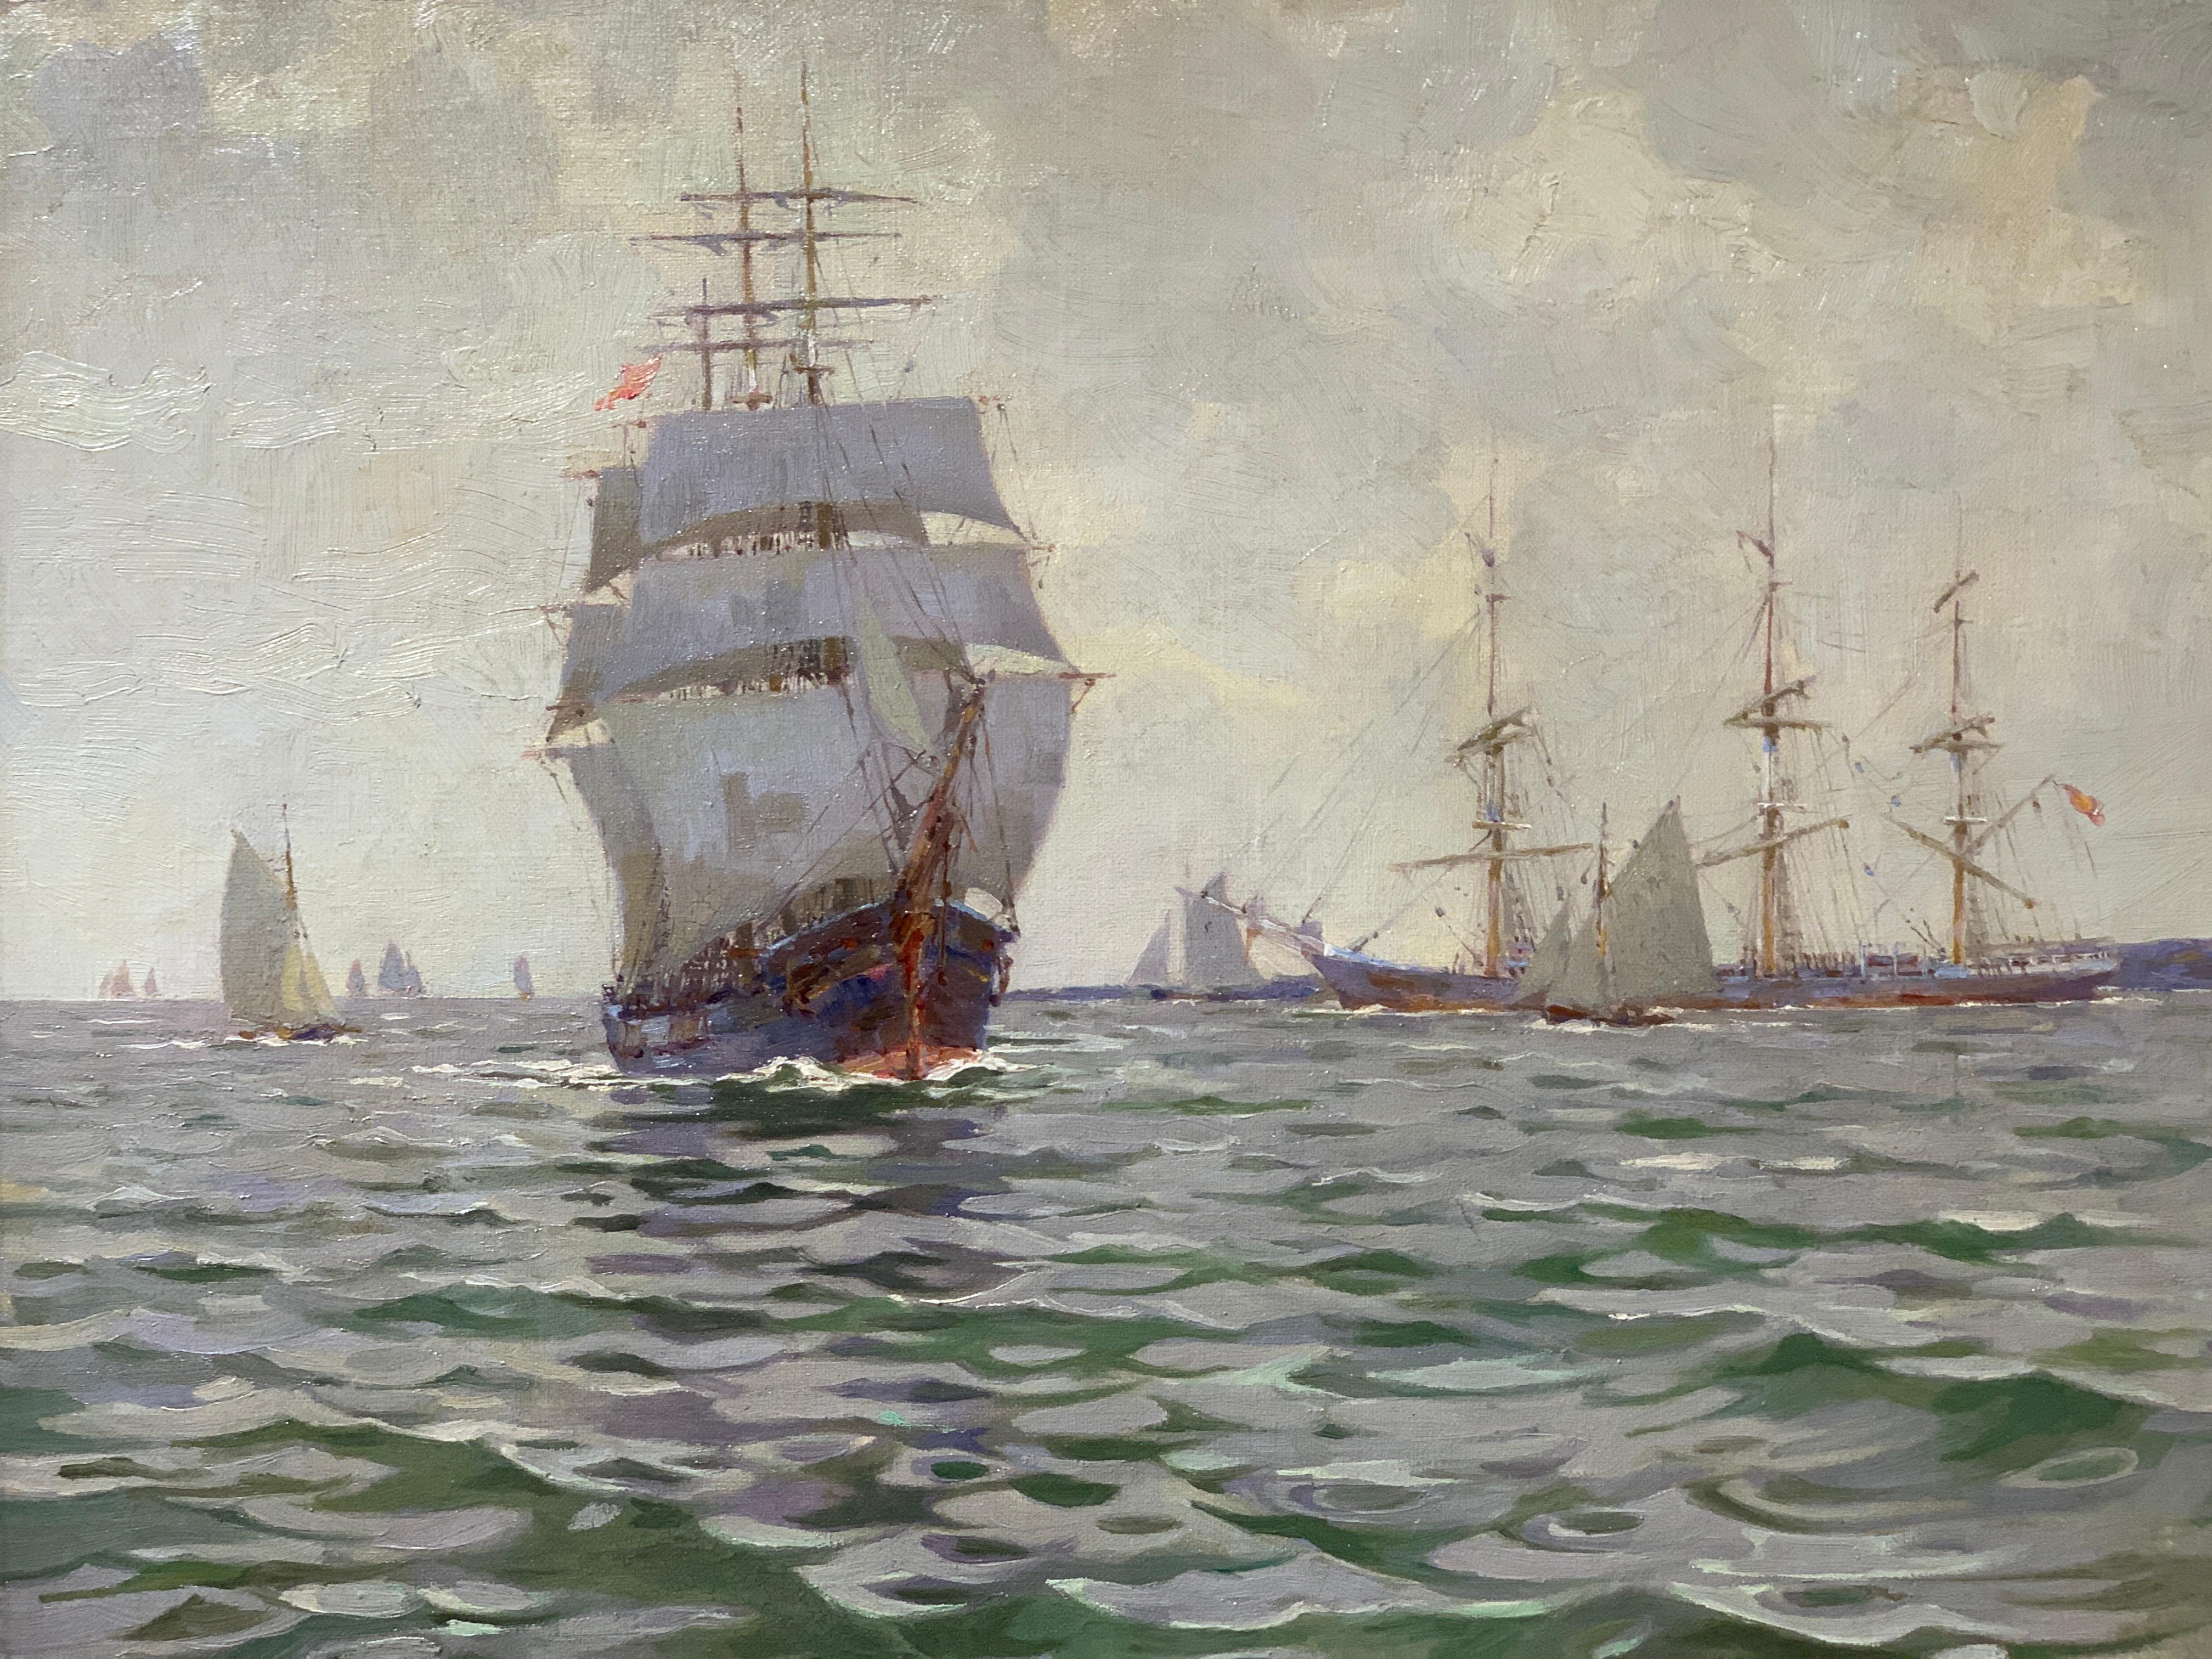 English 20th century Impressionist marine scene with yachts, sailing boats,  - Painting by Walter Frank Kelsey